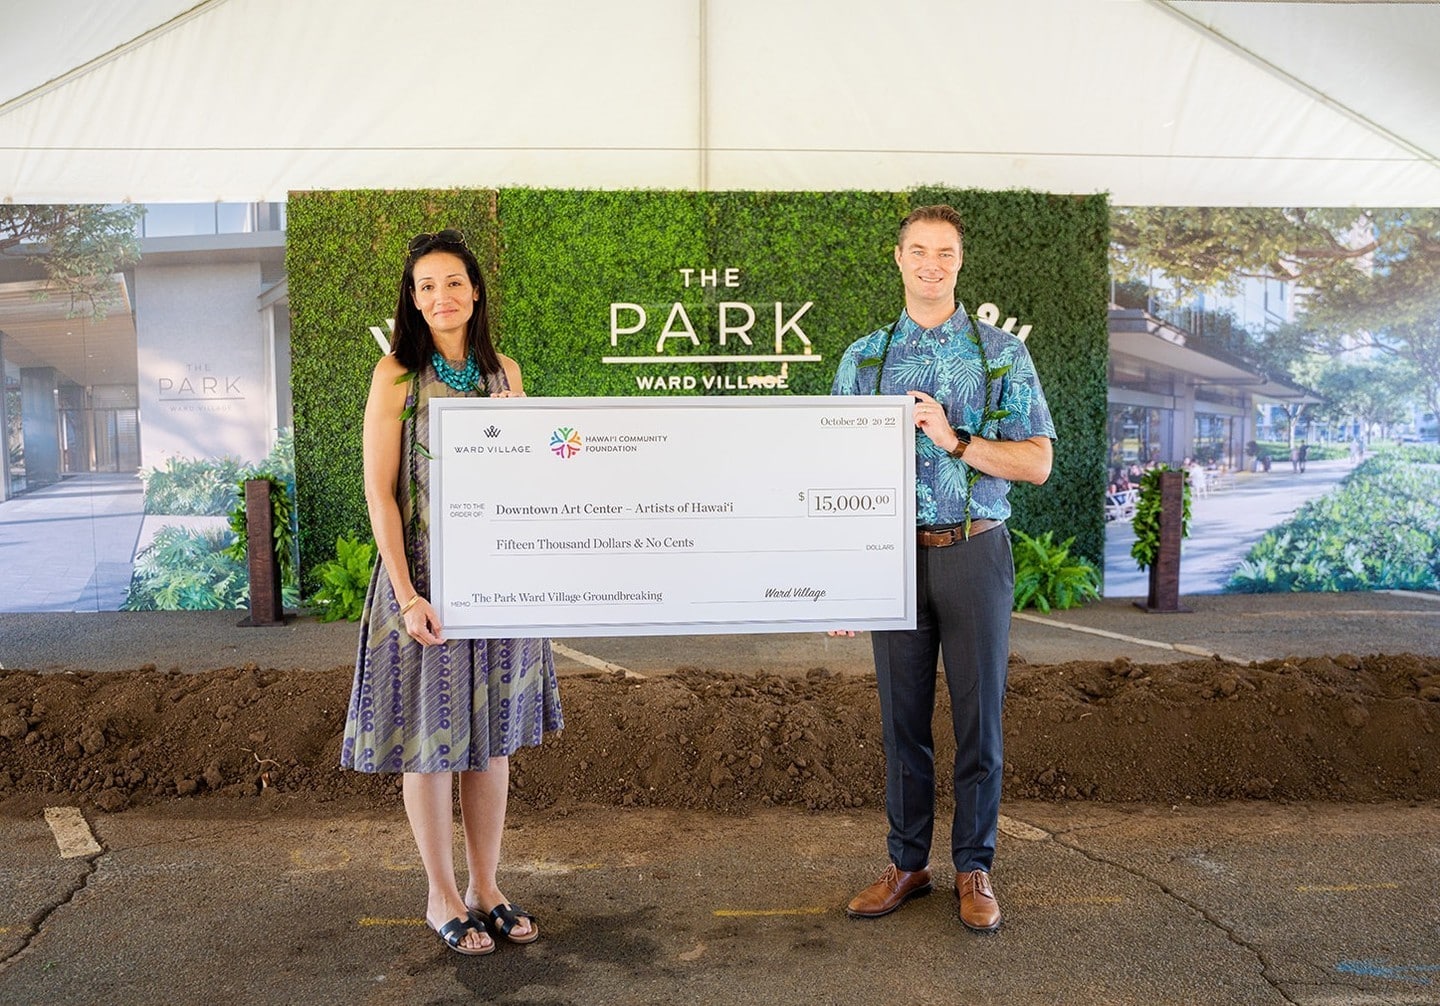 In our recent celebration of the groundbreaking of The Park Ward Village, Ward Village contributed $15,000 to @downtownartcenter to support its Artists of Hawaiʻi exhibit and the organization’s mission to build a thriving and vibrant downtown through the power of creativity and the arts. Learn more about their mission and community programs at the link in our bio.